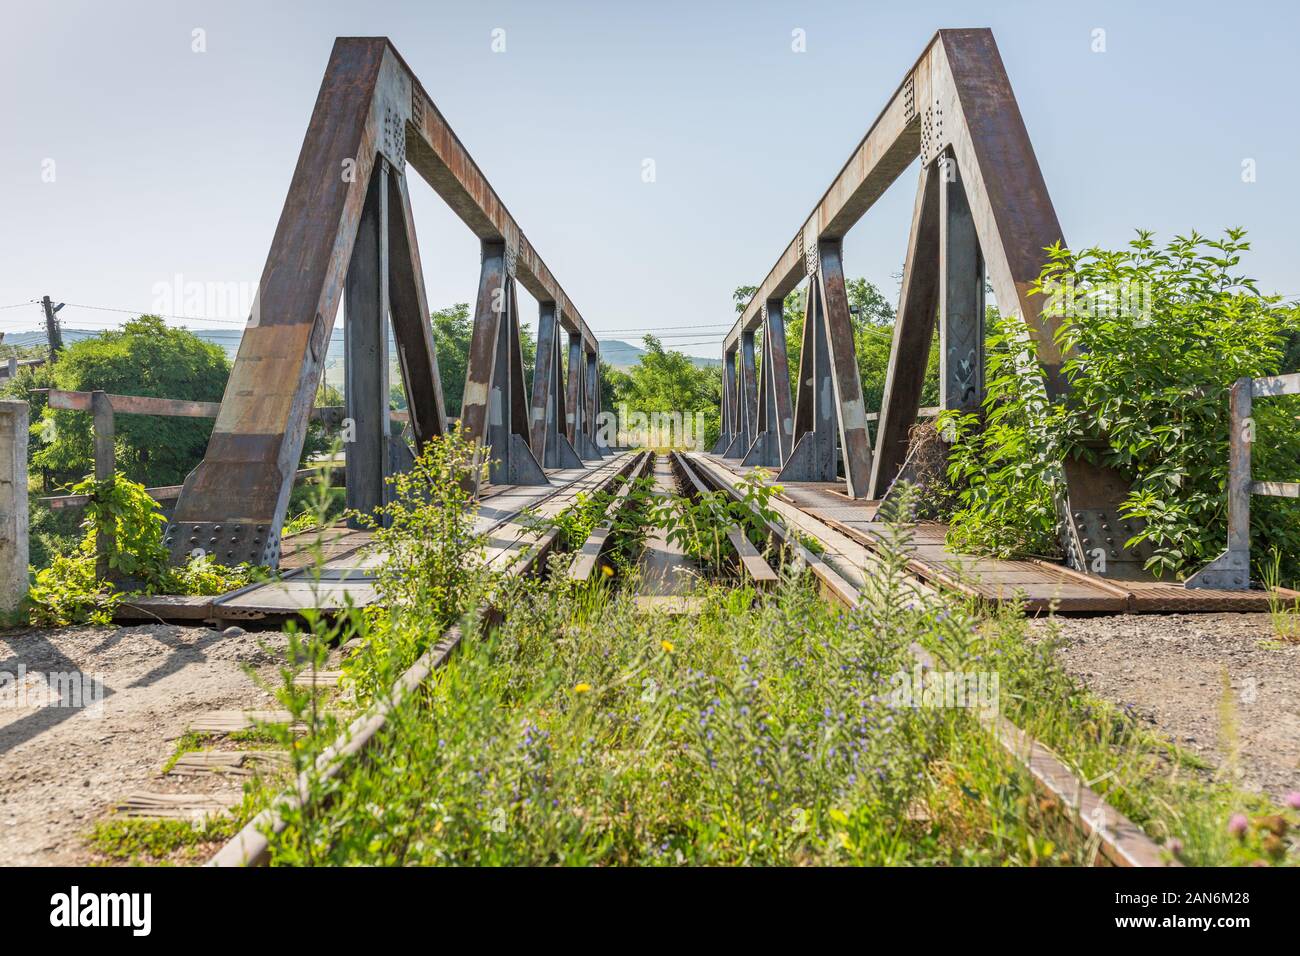 Front view on bridge with steel supports & tracks. Ready to cross the bridge? Concept for support, communiction, collaboration, teamwork, risk. Stock Photo